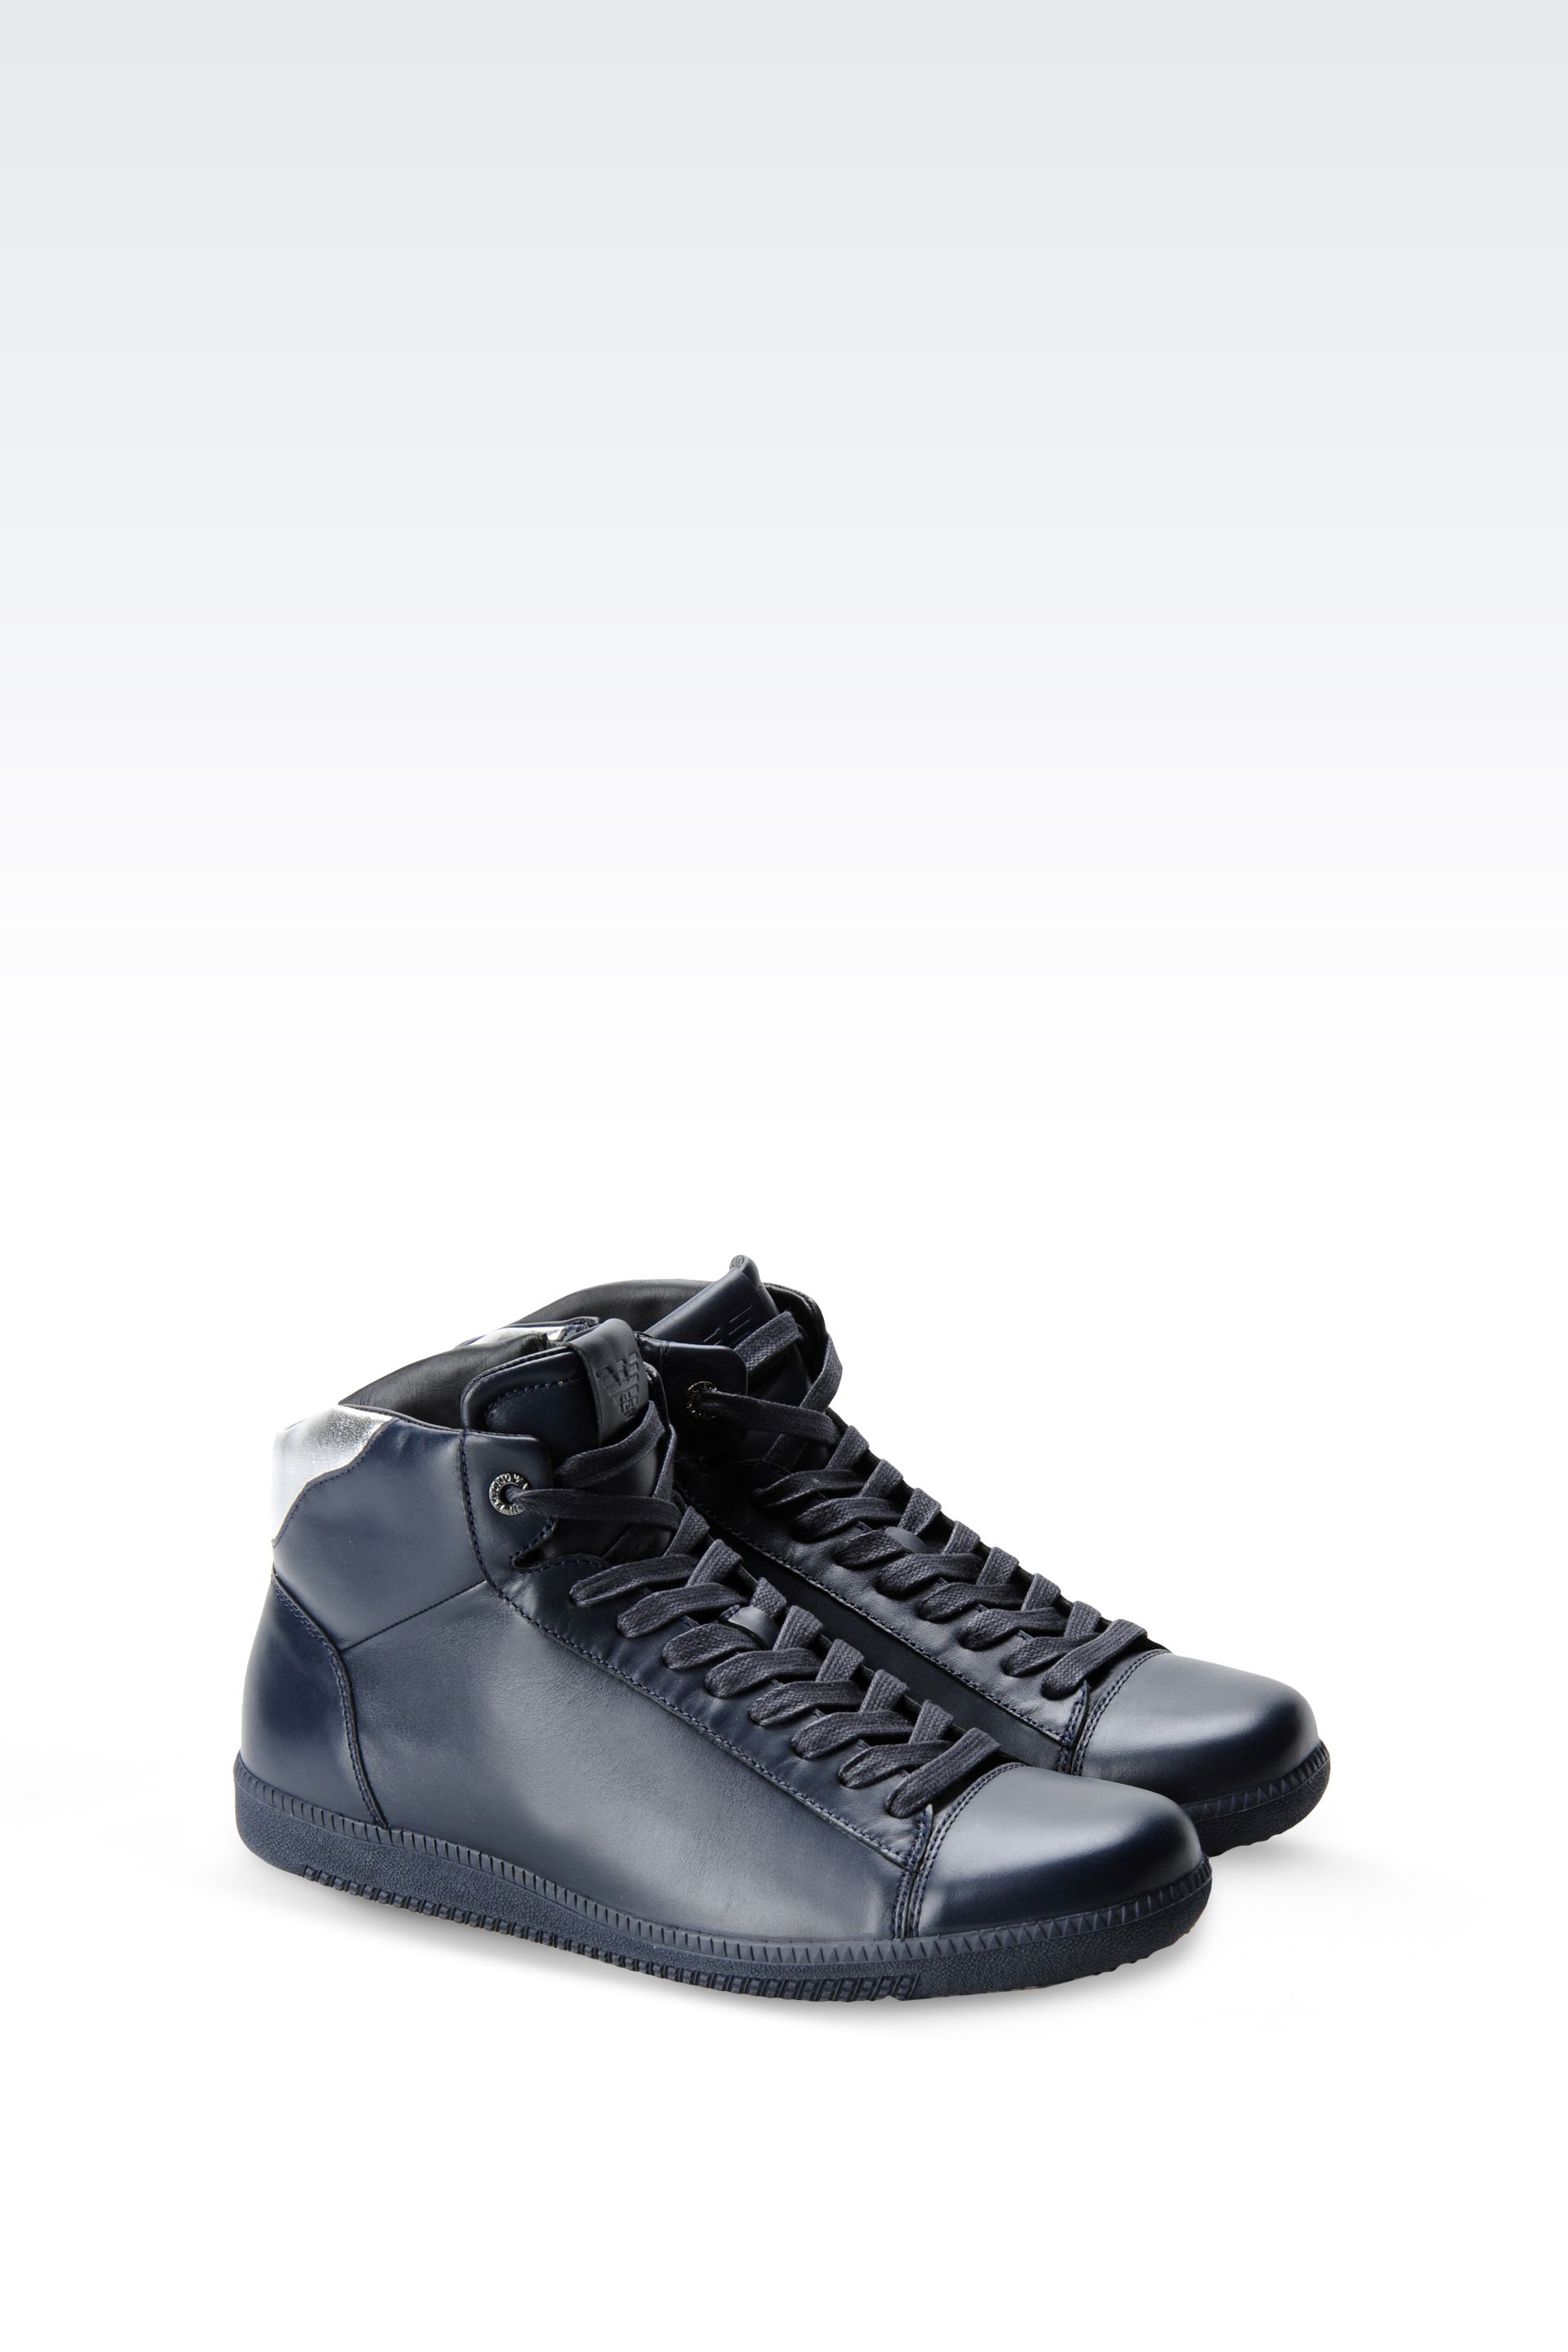 Emporio Armani High Top Sneakers Germany, SAVE 45% - aveclumiere.com